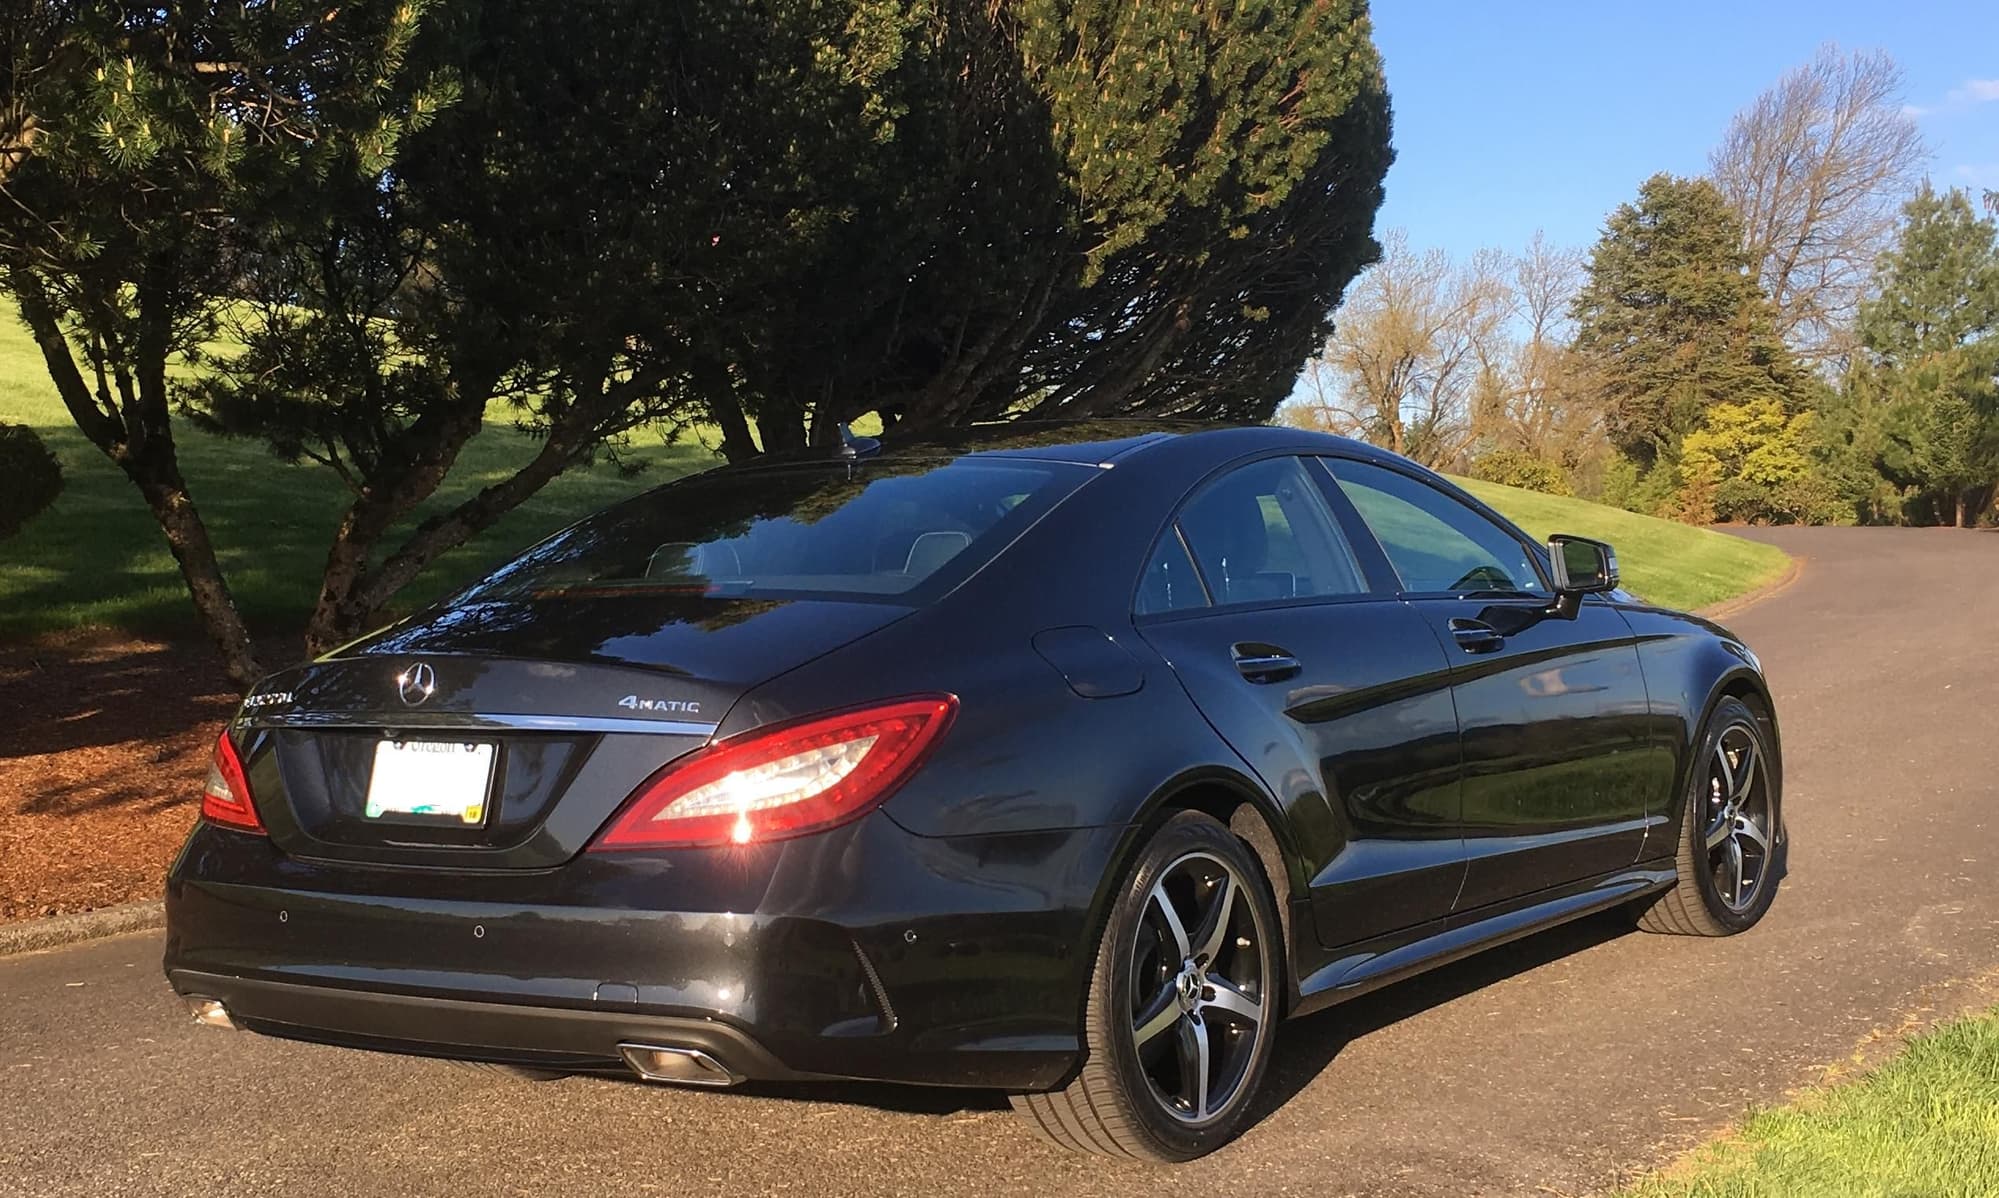 2017 Mercedes-Benz CLS550 - 2017 CLS550 4Matic - Magnetite Black (Lease Transfer option) - Used - VIN WDDLJ9BB6HA196812 - 14,000 Miles - 8 cyl - AWD - Automatic - Coupe - Black - Beaverton, OR 97007, United States